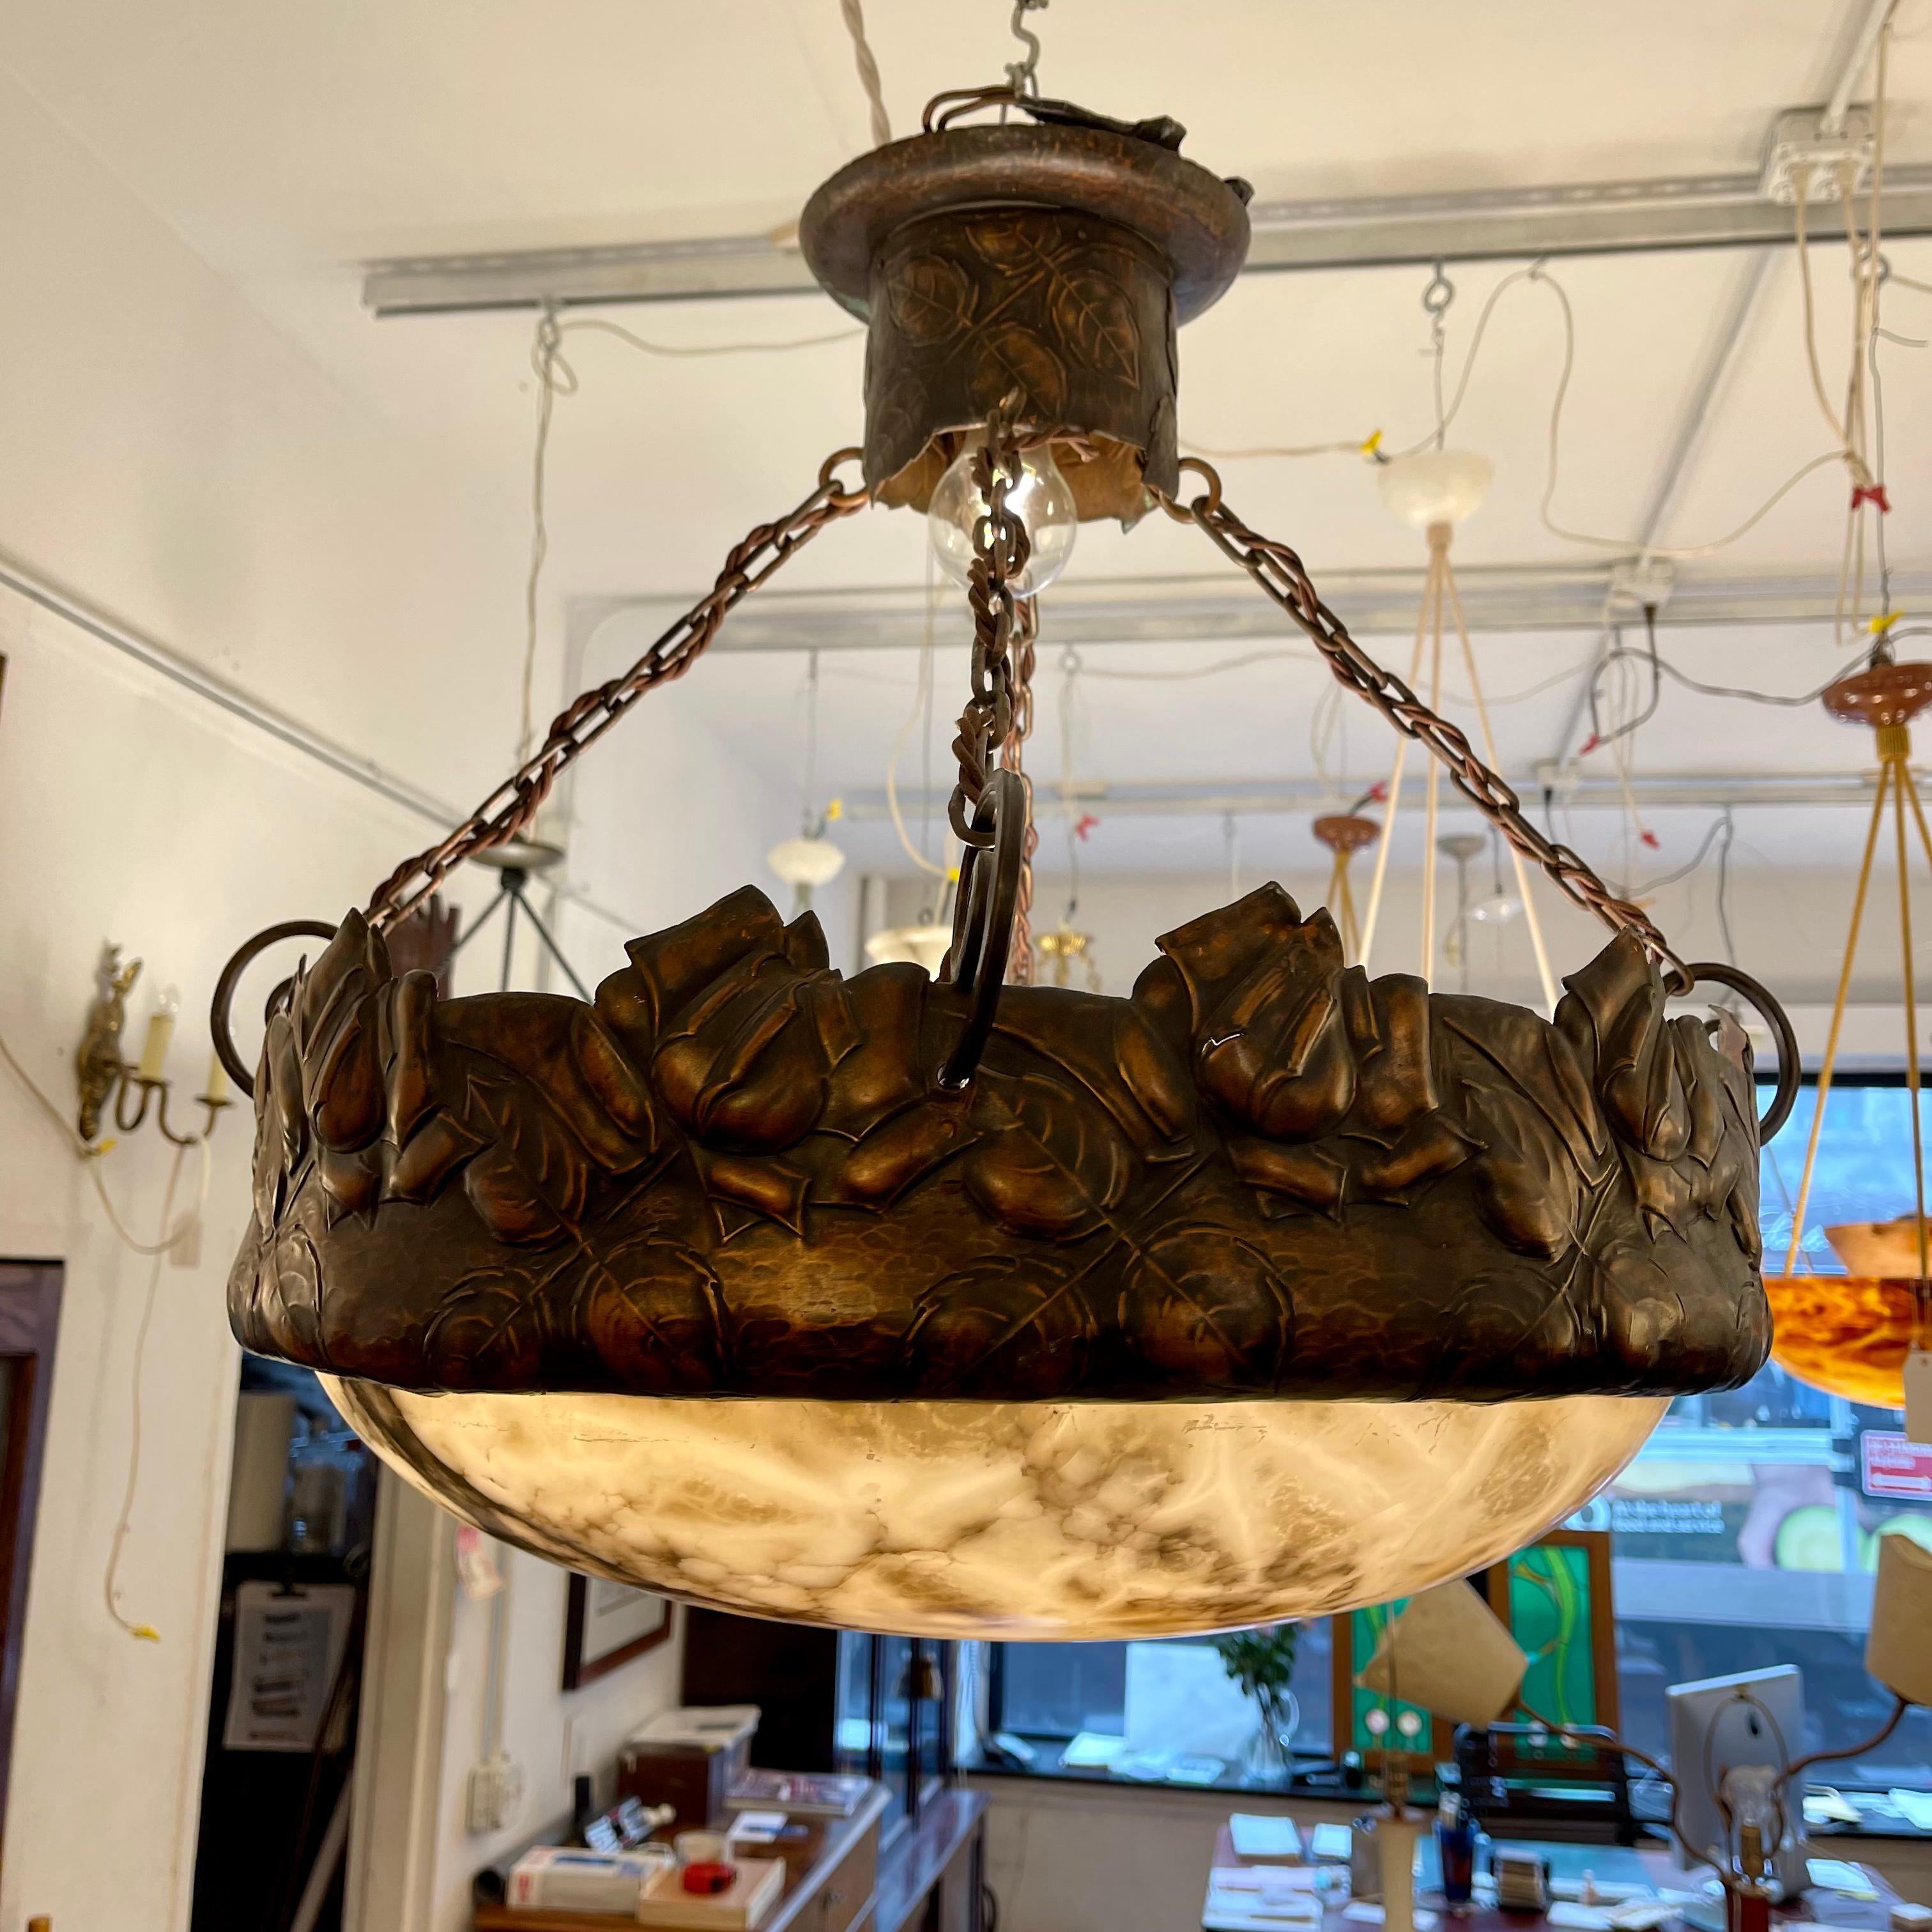 A highly figured alabaster stone shade is suspended in a gorgeous hammered copper collar. Repoussaged young roses adorn the top of the collar, with custom chain and electrified canopy to match. Mounts four standard bulbs in the shade with max